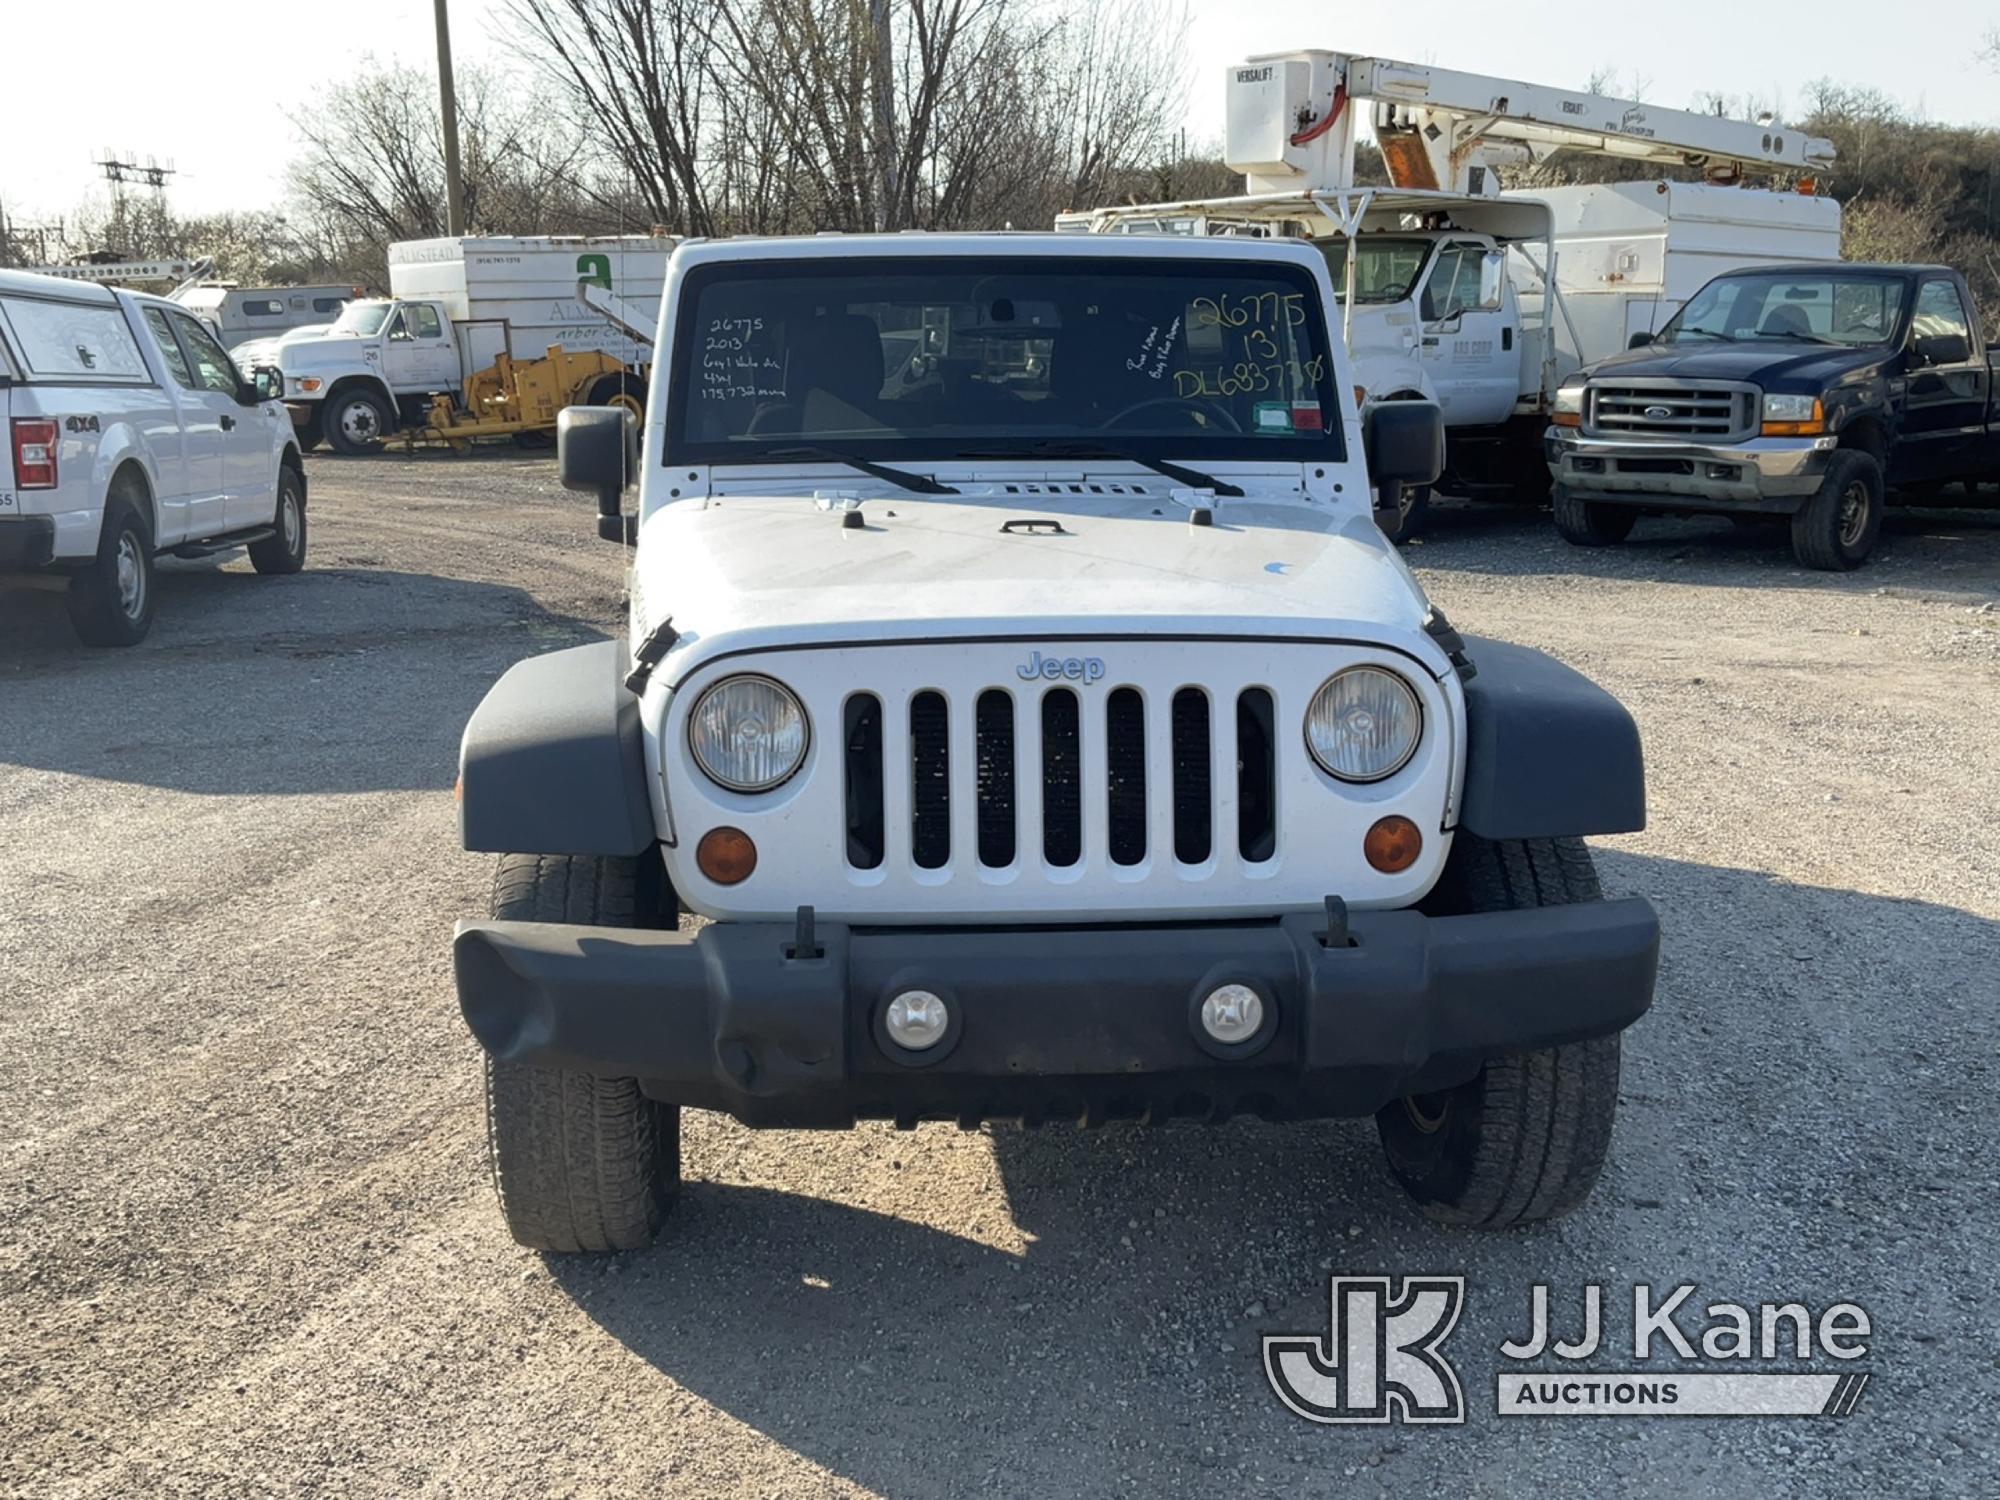 (Plymouth Meeting, PA) 2013 Jeep Wrangler Rubicon 4x4 4-Door Sport Utility Vehicle Runs & Moves, Bod